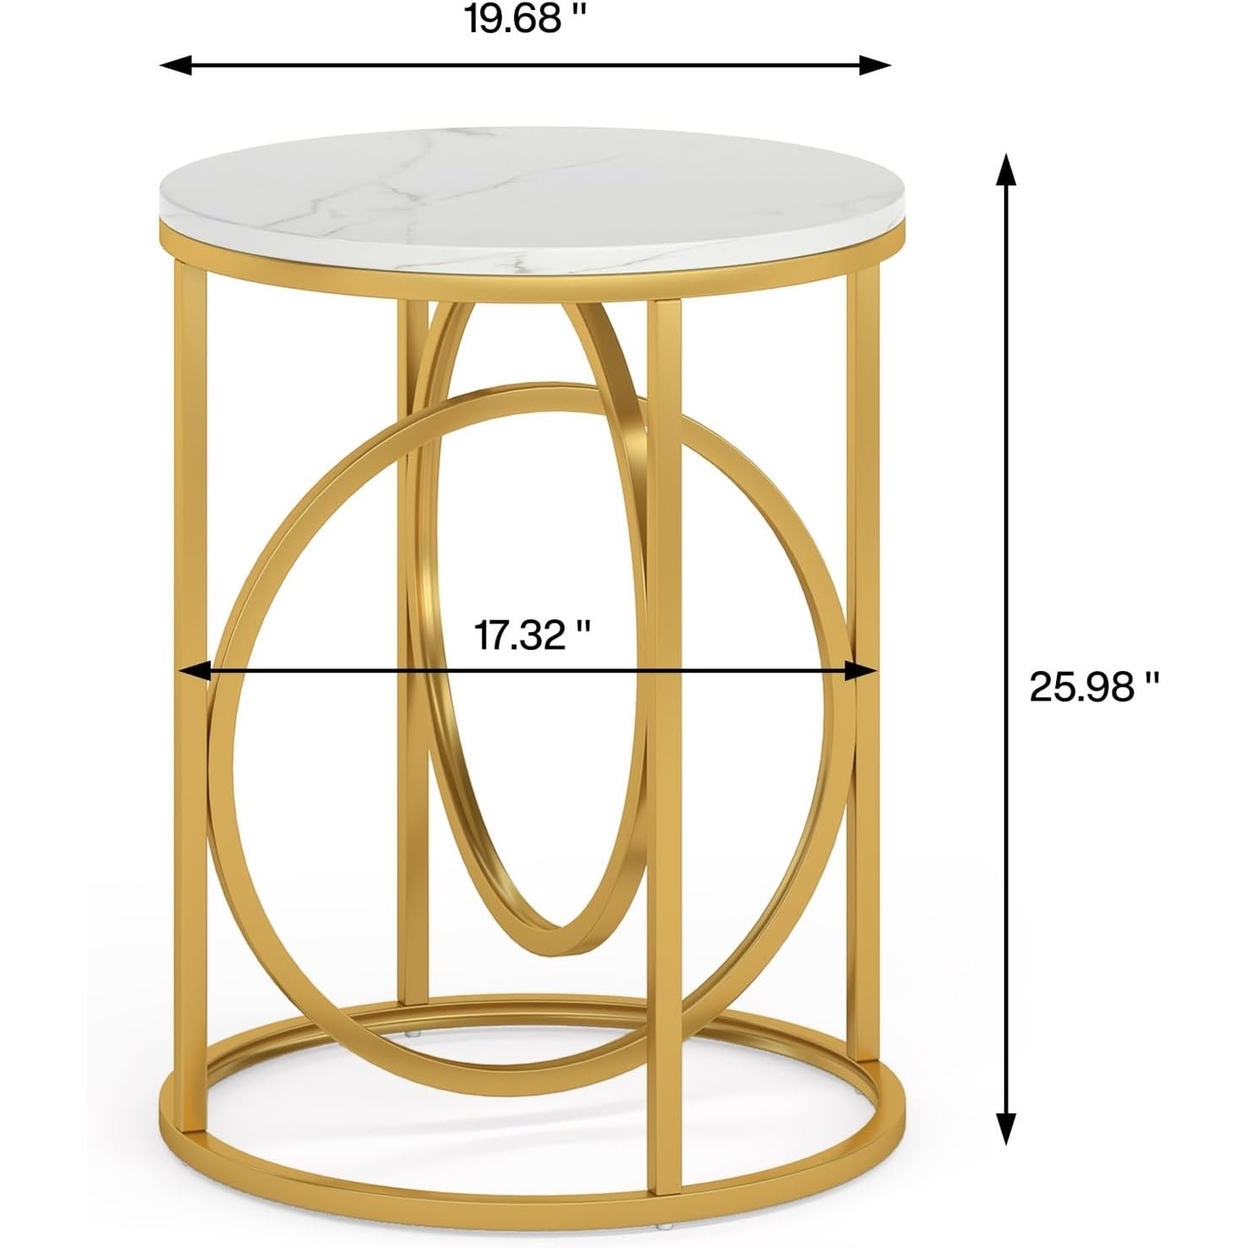 Tribesigns Modern Round End Table, 20 Sofa Side Table Cocktail Table With Unique Gold O-Shaped Base - White, 1pc